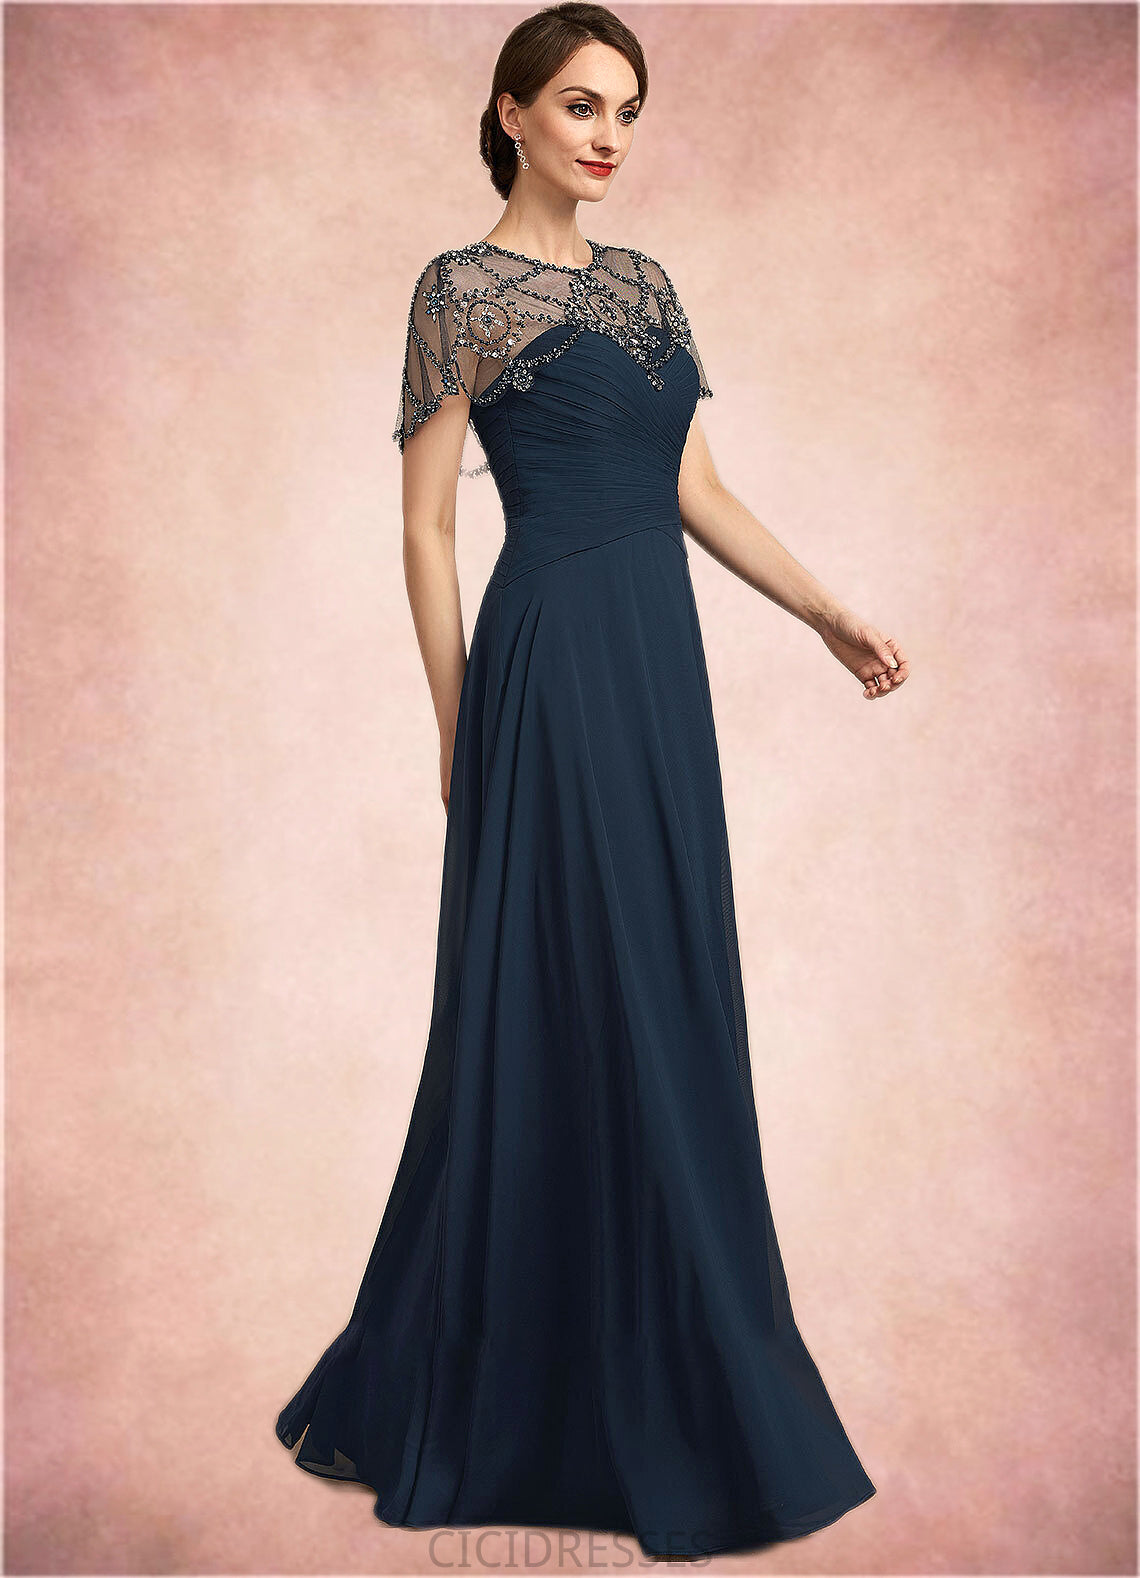 Trudie A-Line Scoop Neck Floor-Length Chiffon Mother of the Bride Dress With Ruffle Beading Sequins CIC8126P0014711